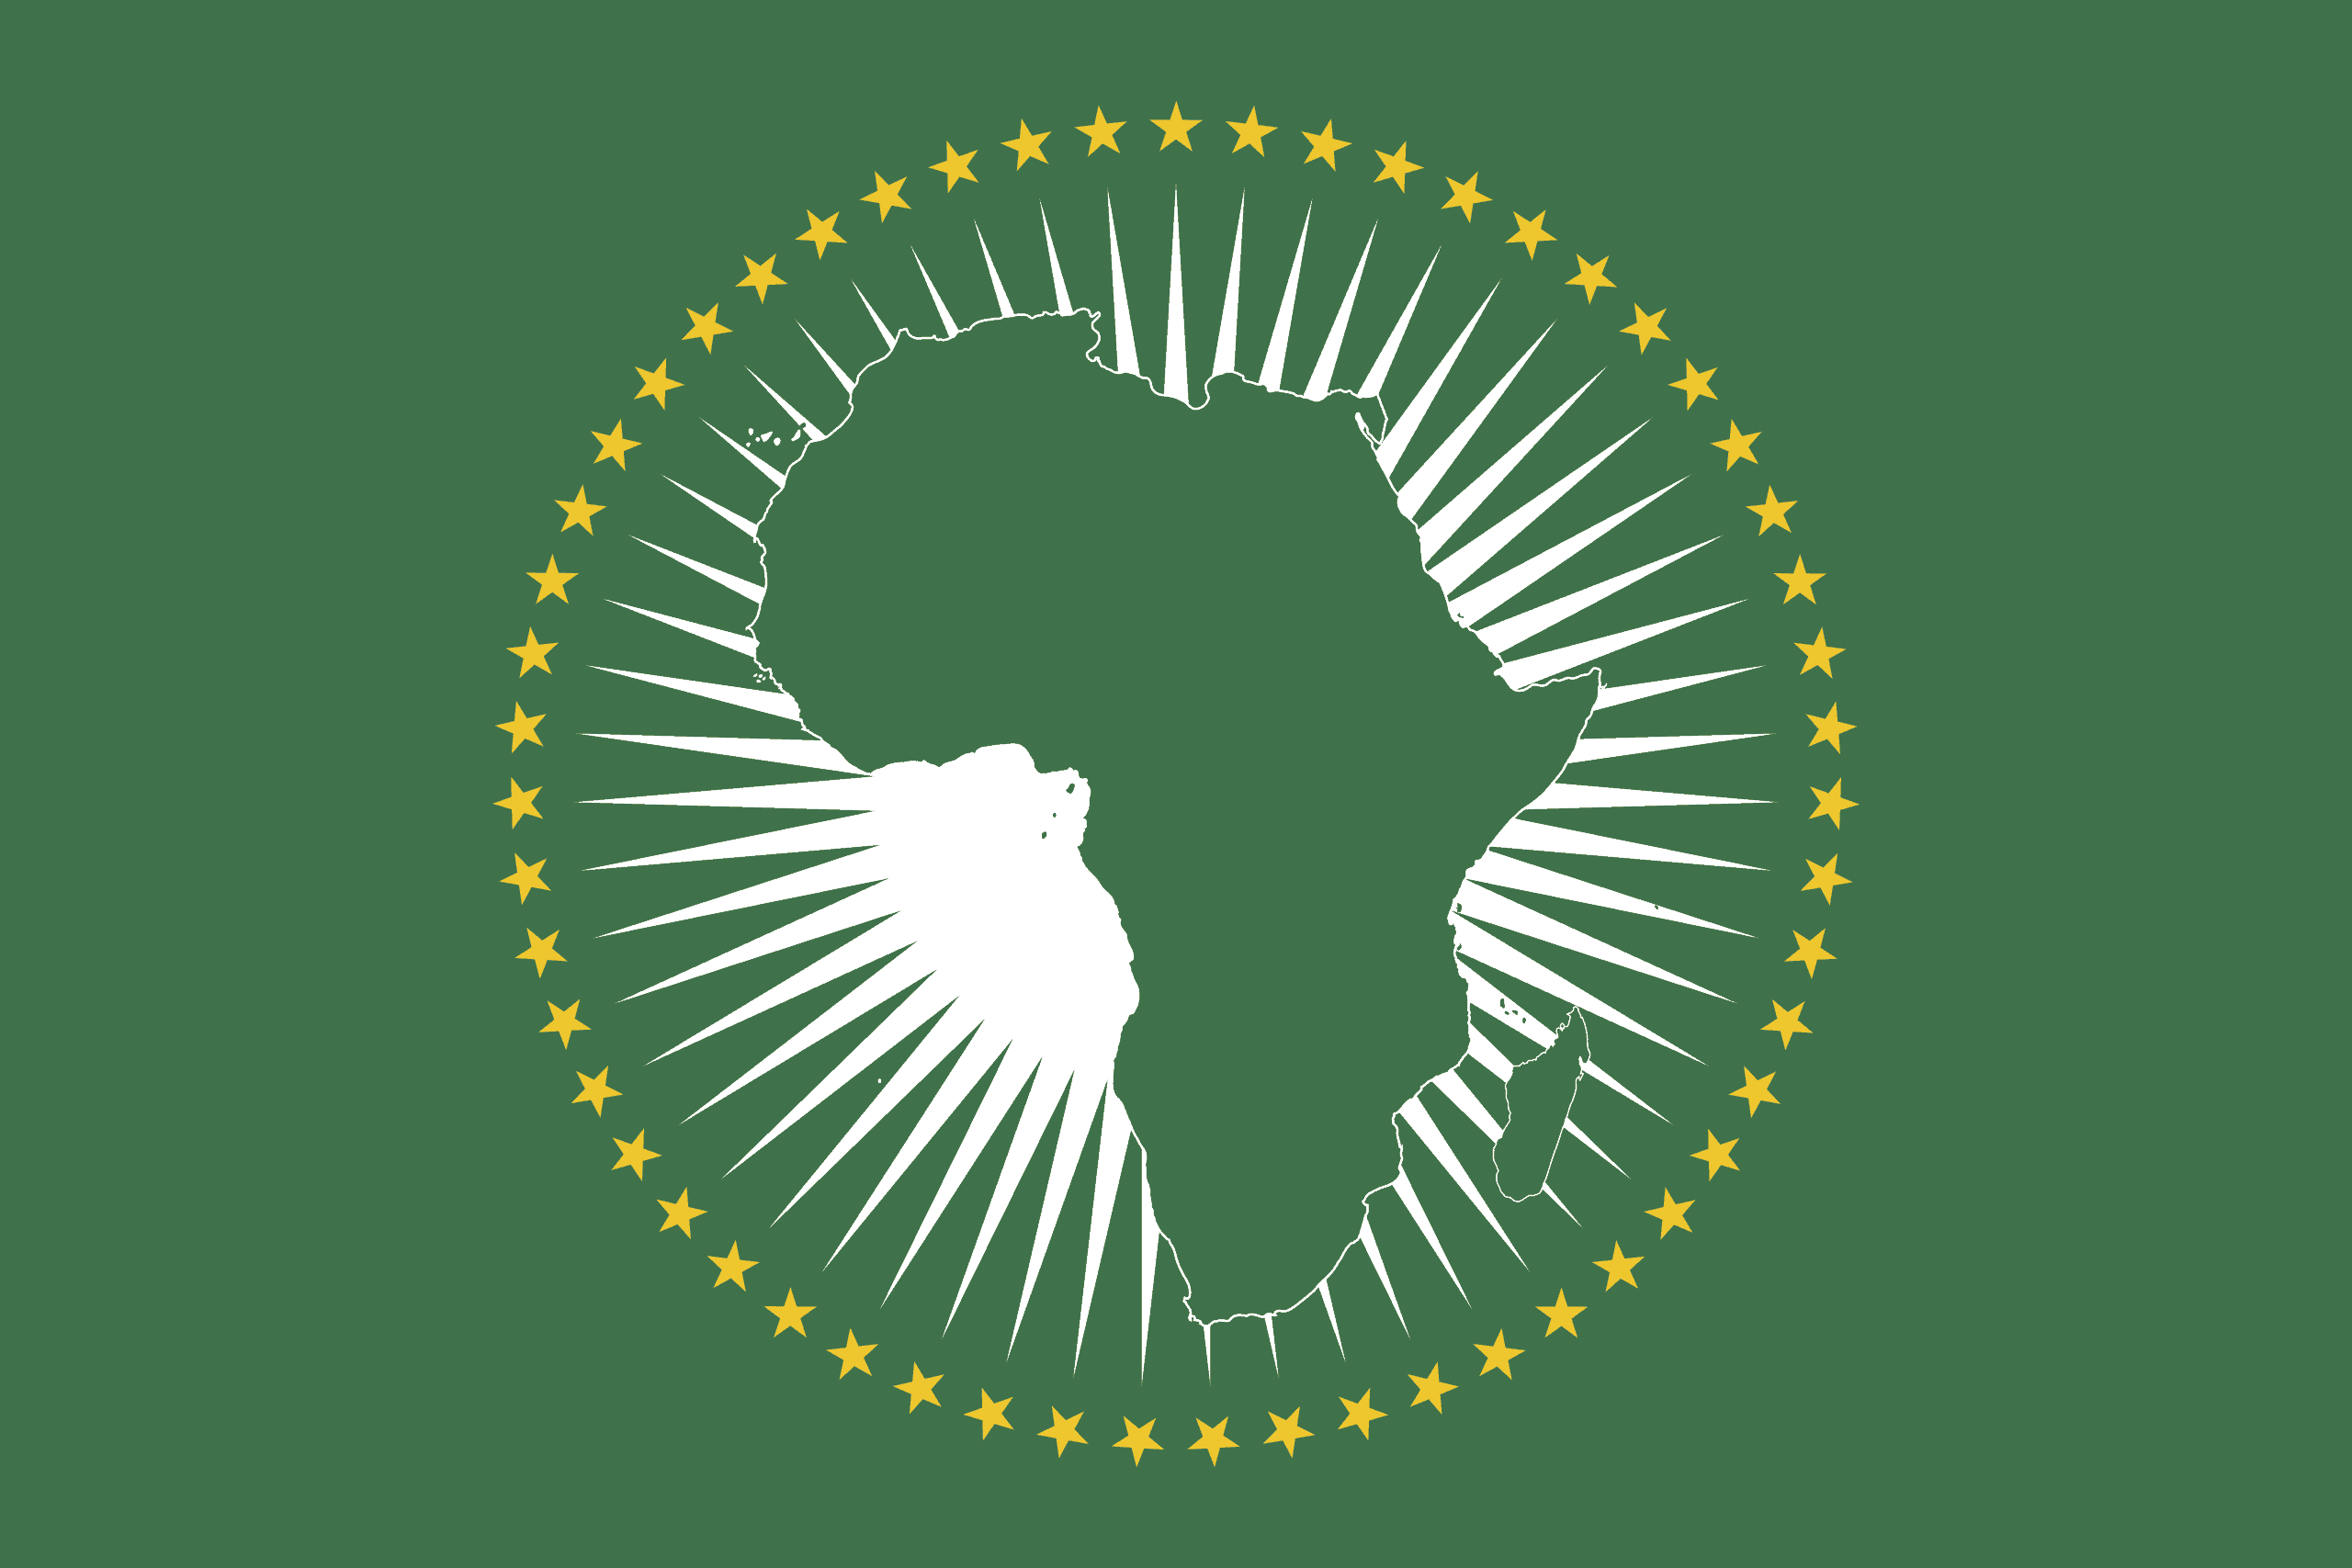 The flag of the African Union.